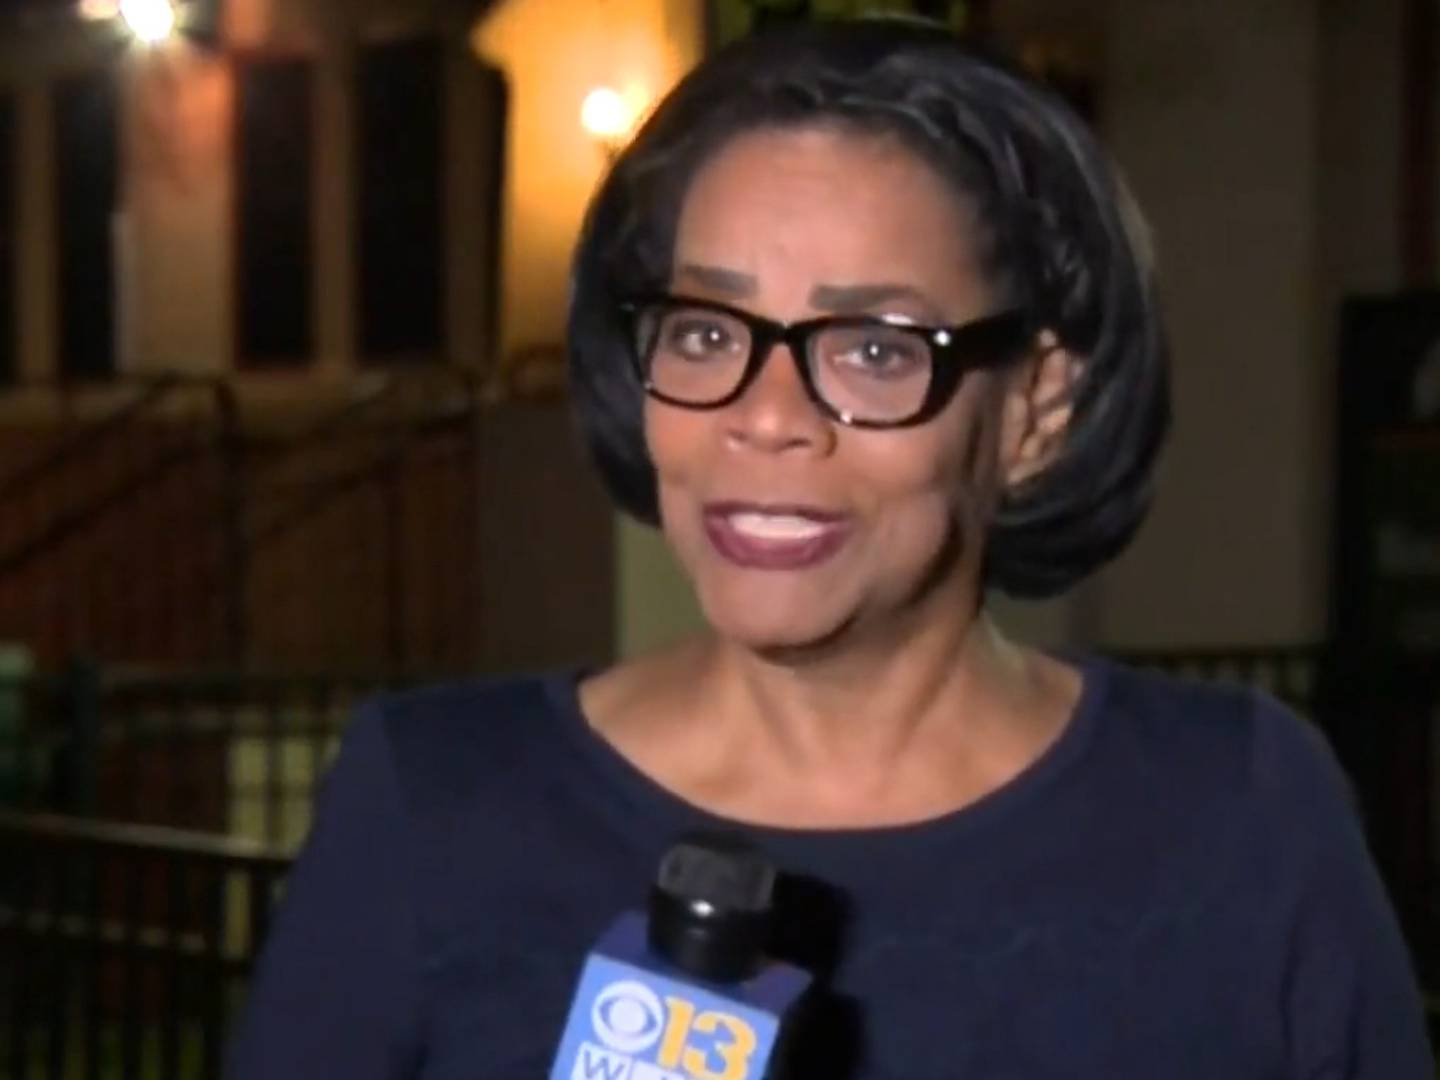 A woman wearing glasses holds a microphone and speaks to the camera. A screen grab of a news broadcast.